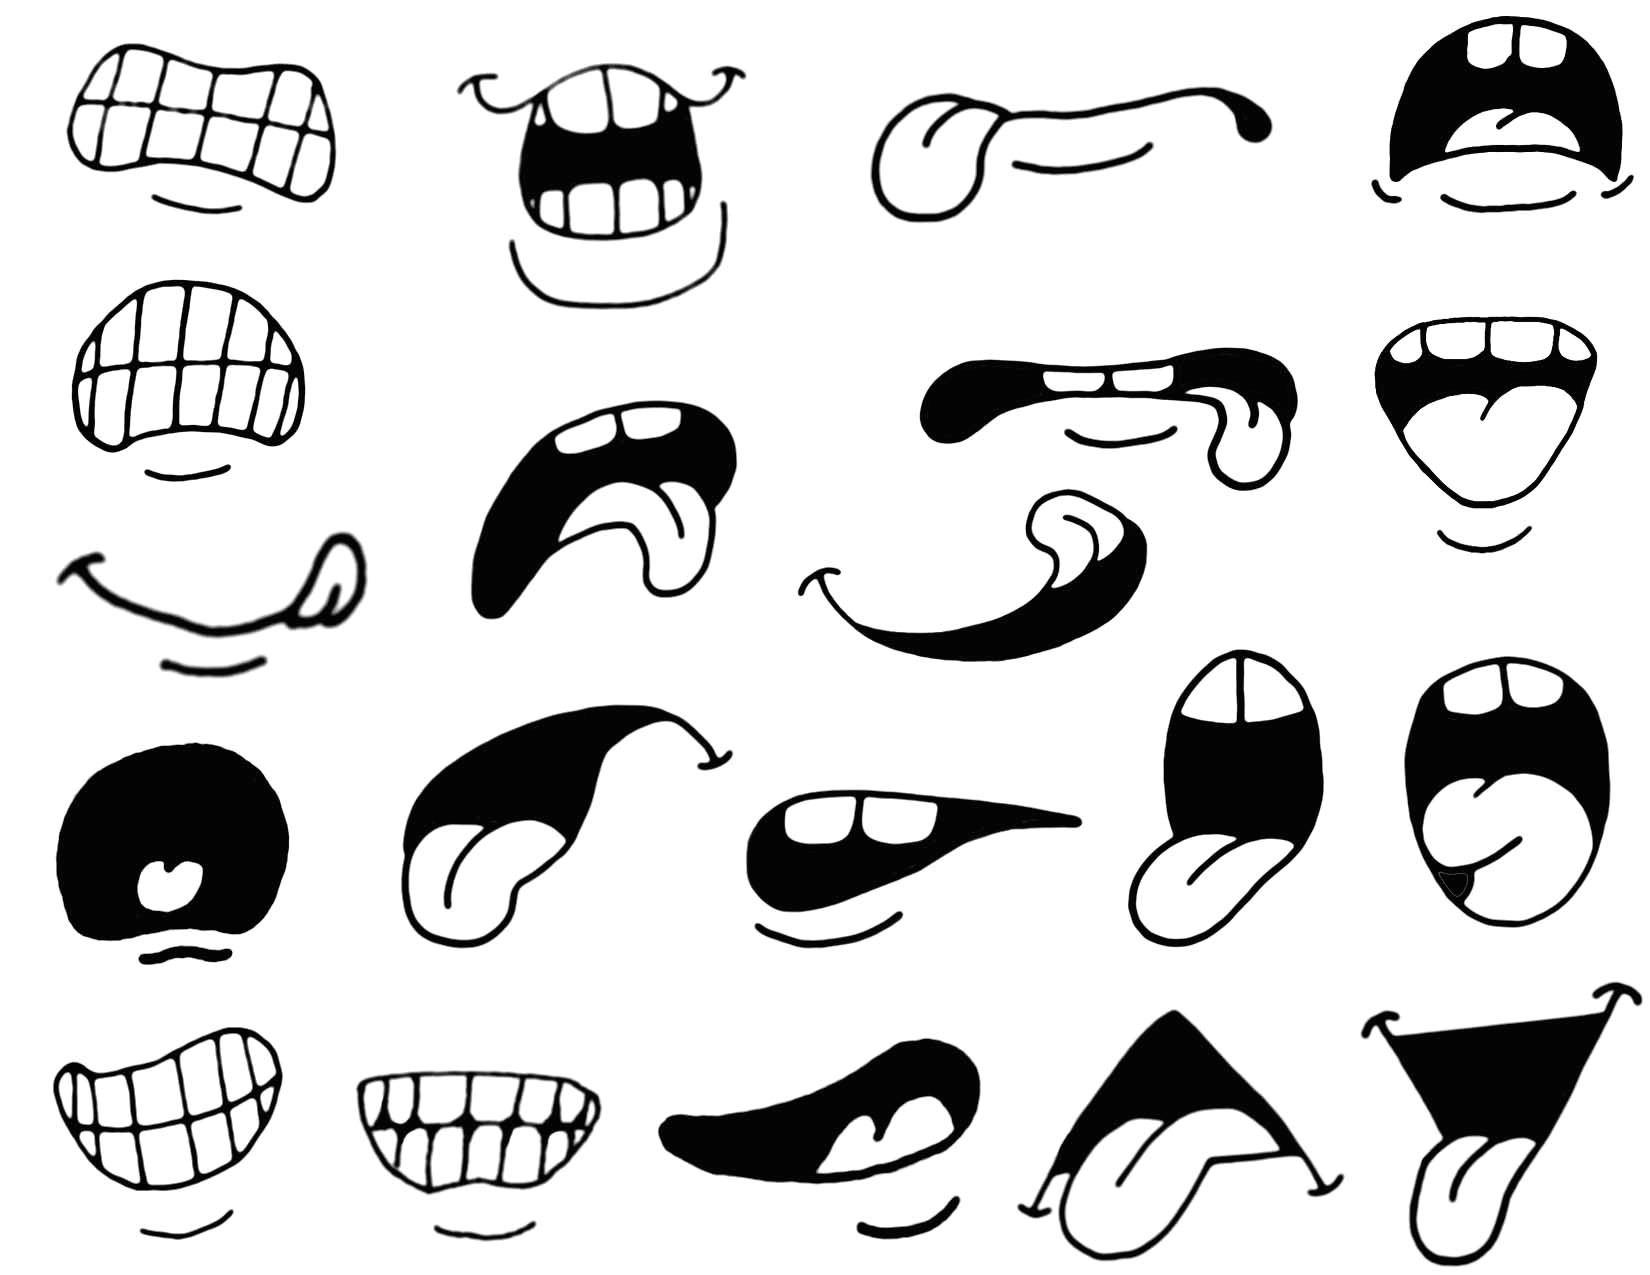 Drawing Cartoons Mouth Pictures Of Cartoon Mouths Group with 65 Items